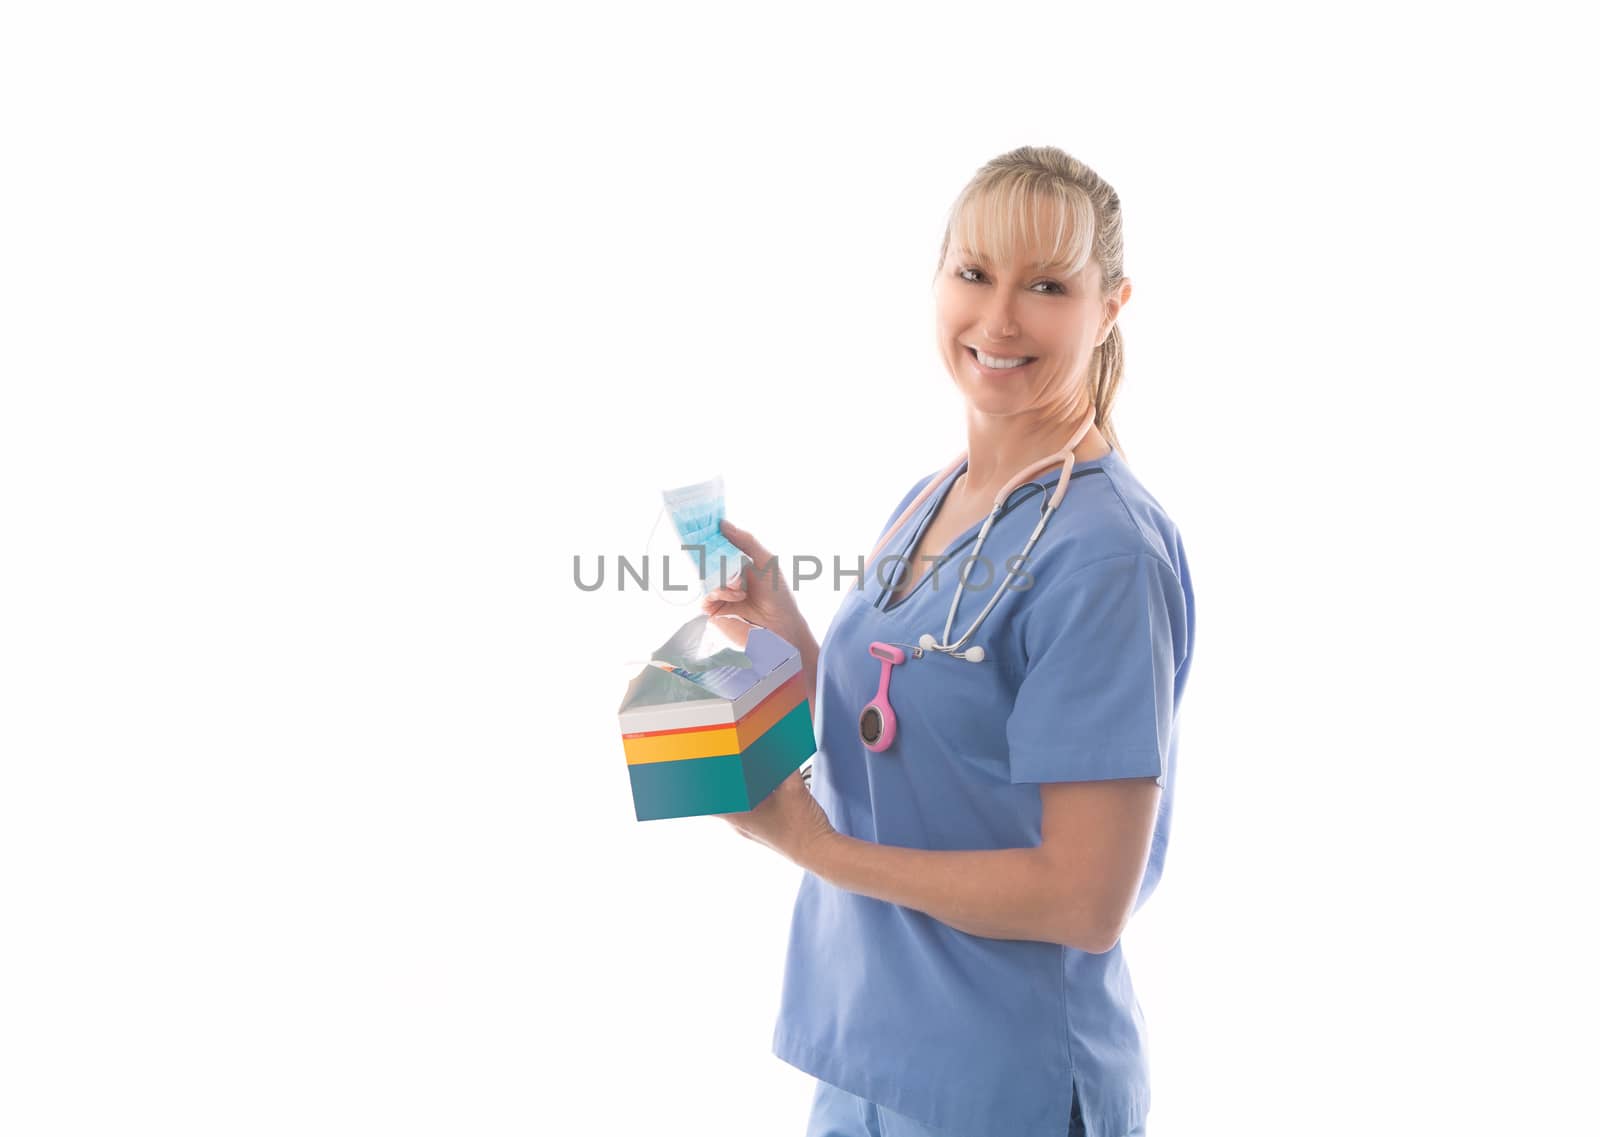 Friendly nurse in scrubs holding a box of surgical medical masks. Much needed PPE during flu season or pandemic such as coronavirus, SARS, MERS or other surgical procedures